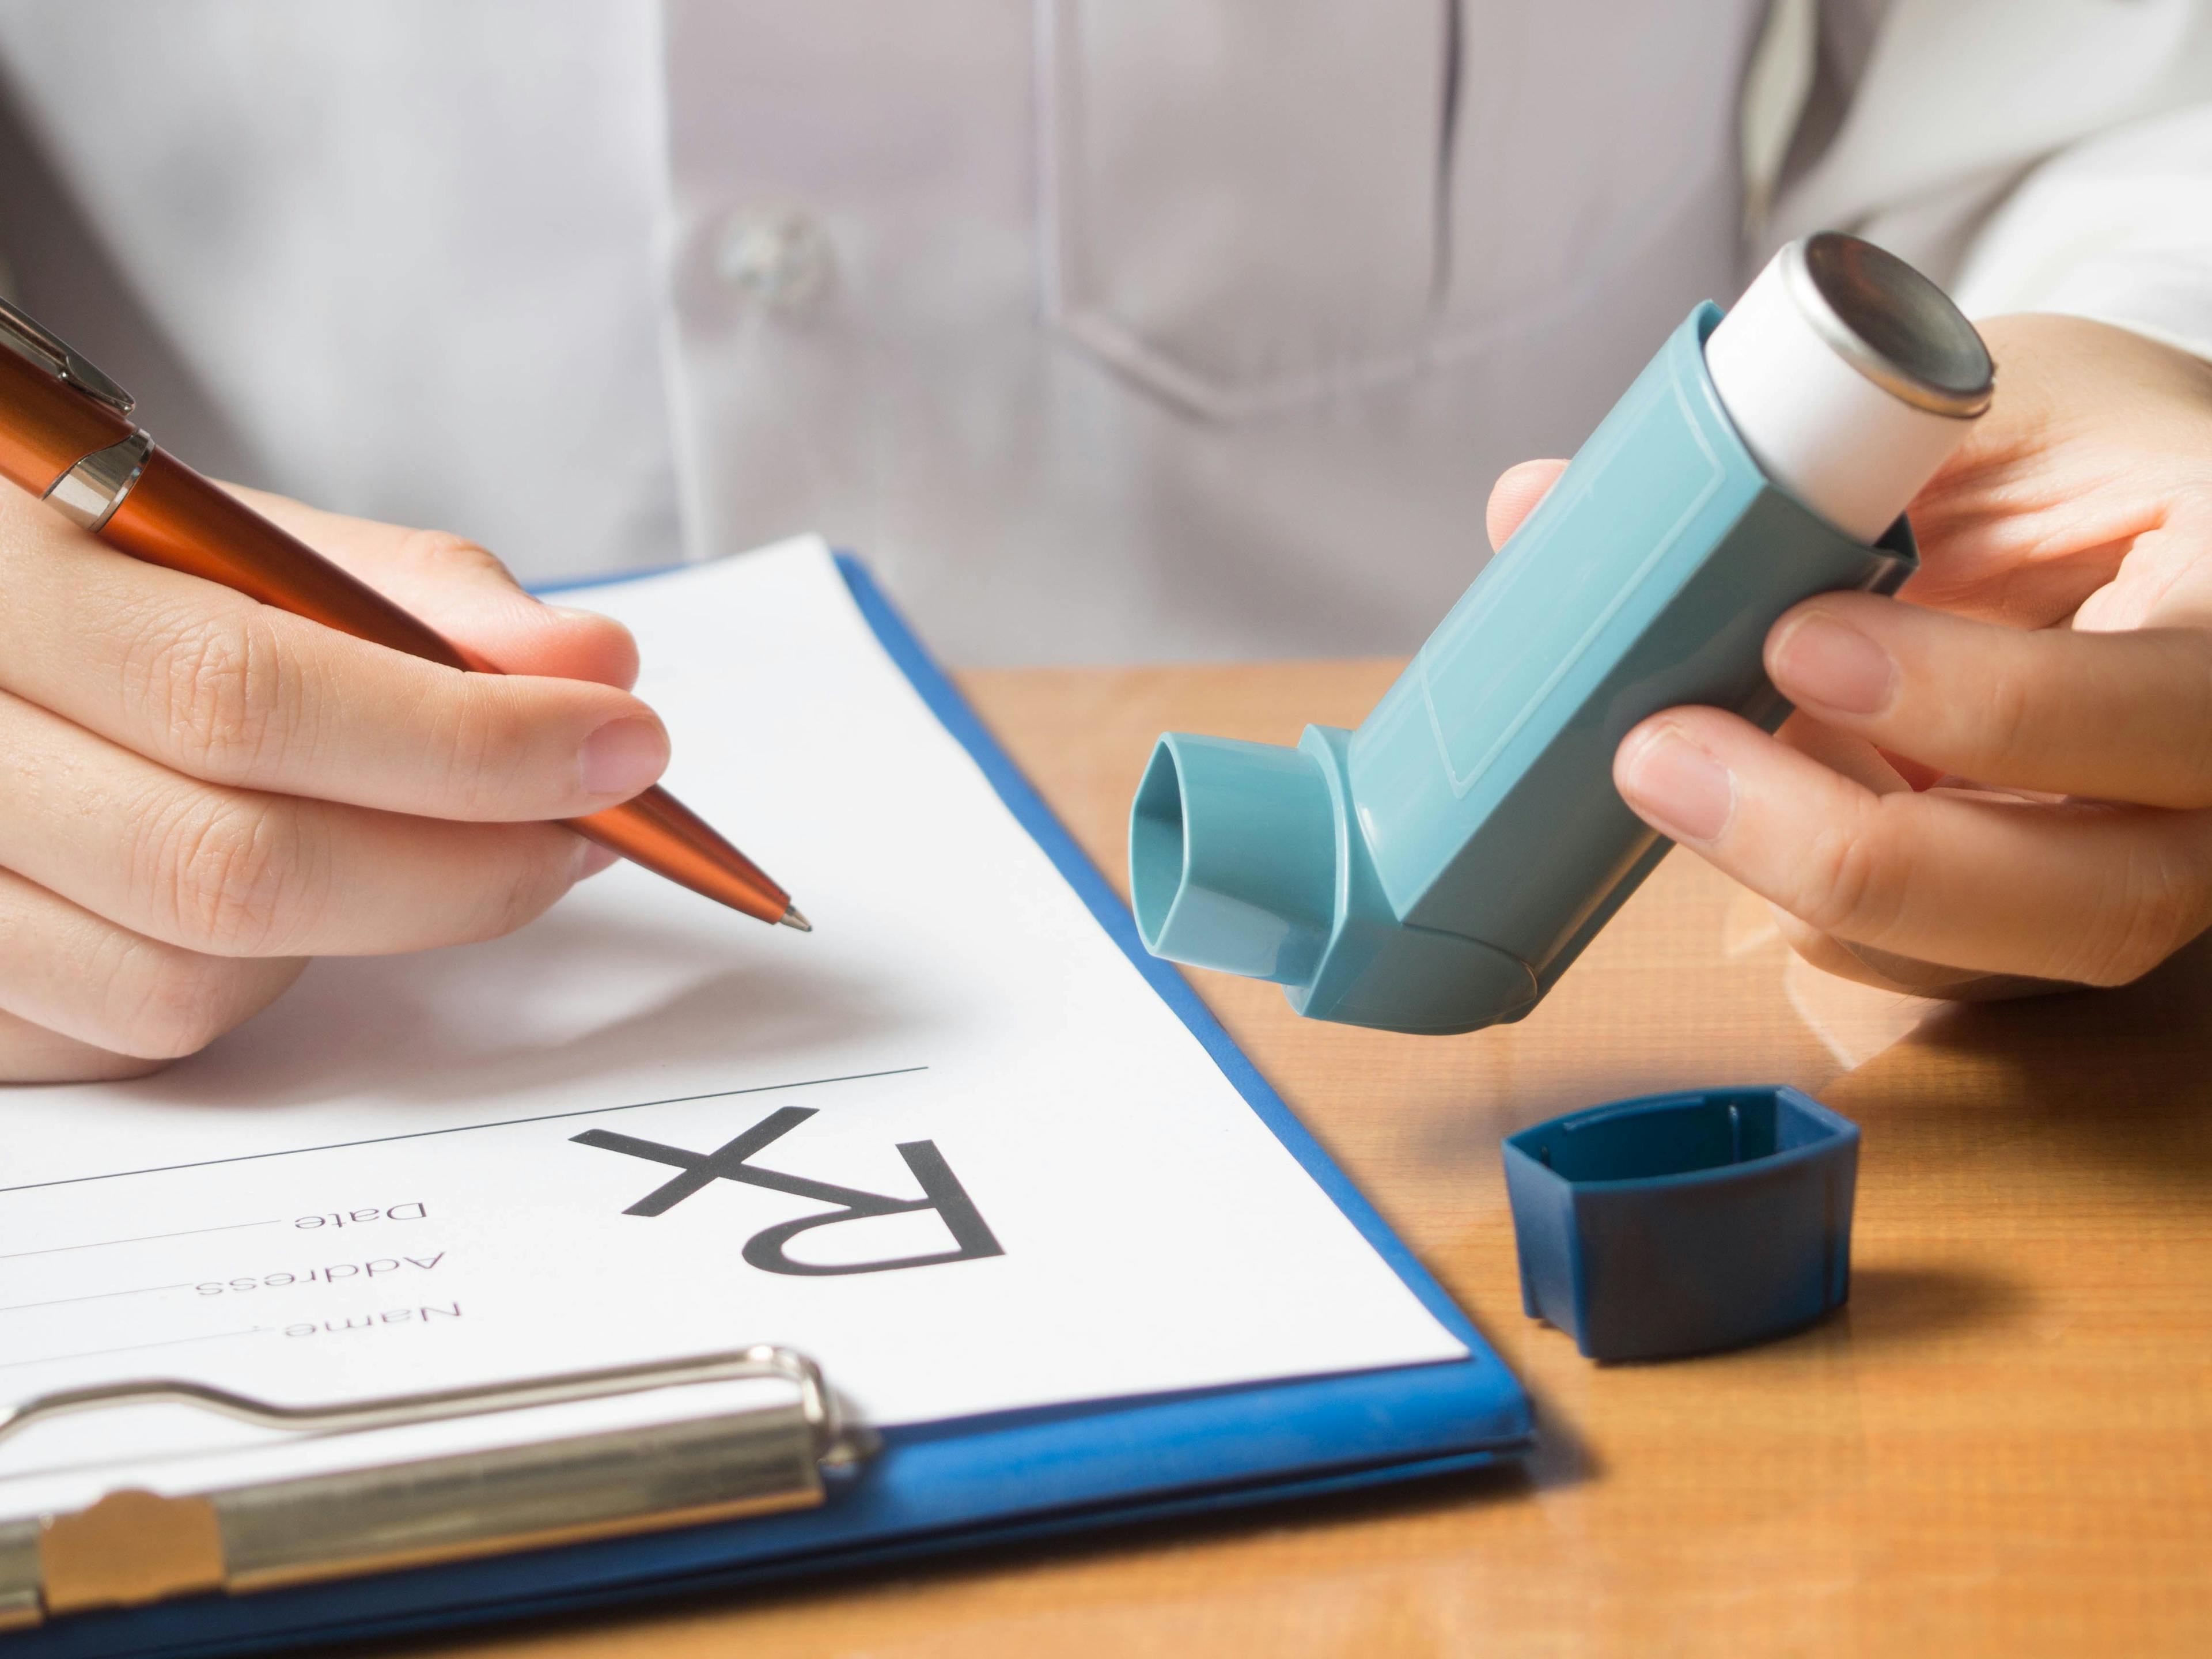 Close up of doctor hand holding blue asthma inhaler and writing medical prescription on rx form for treatment asthma | Image Credit: Orawan - stock.adobe.com